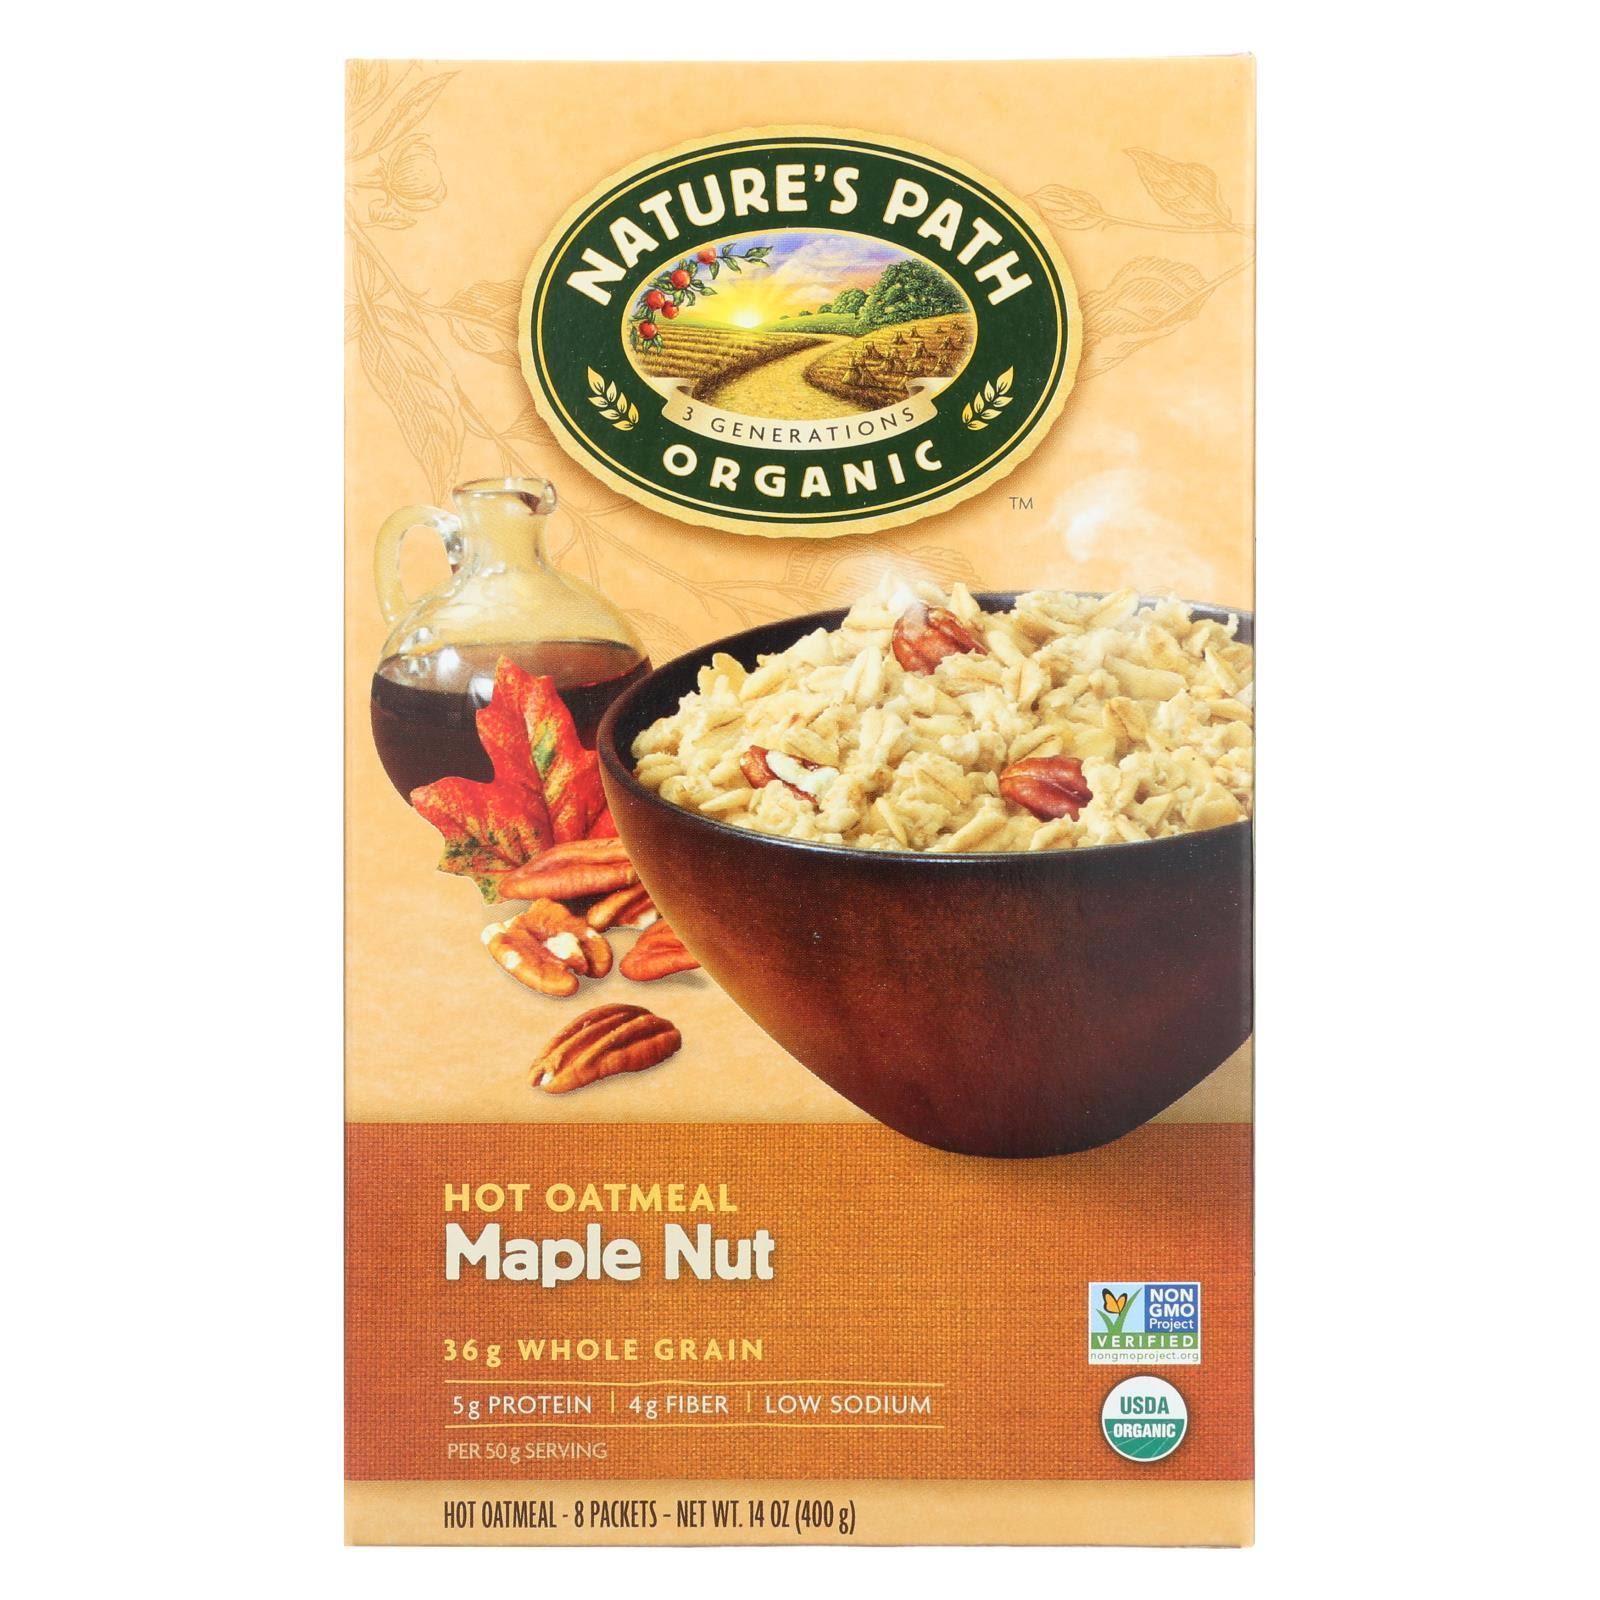 Nature's Path Organic Instant Hot Oatmeal - Maple Nut, 400g